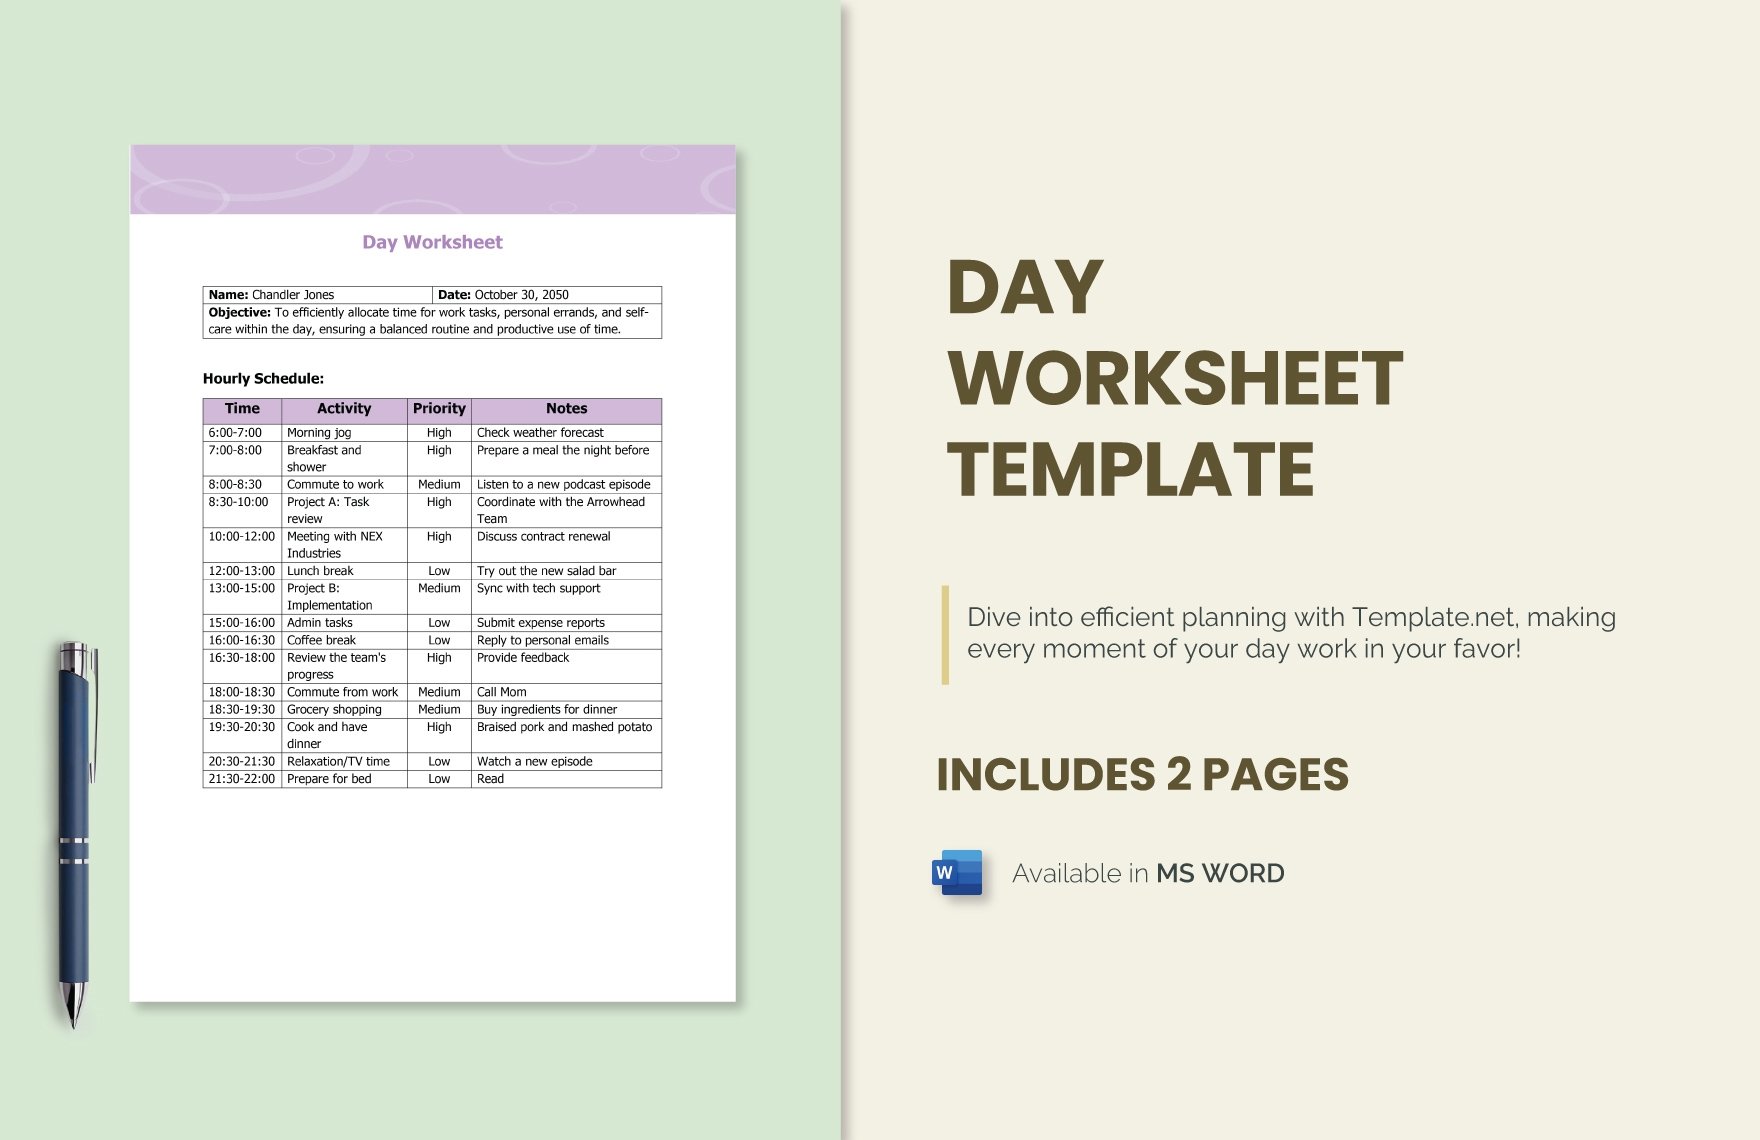 Day Worksheet Template